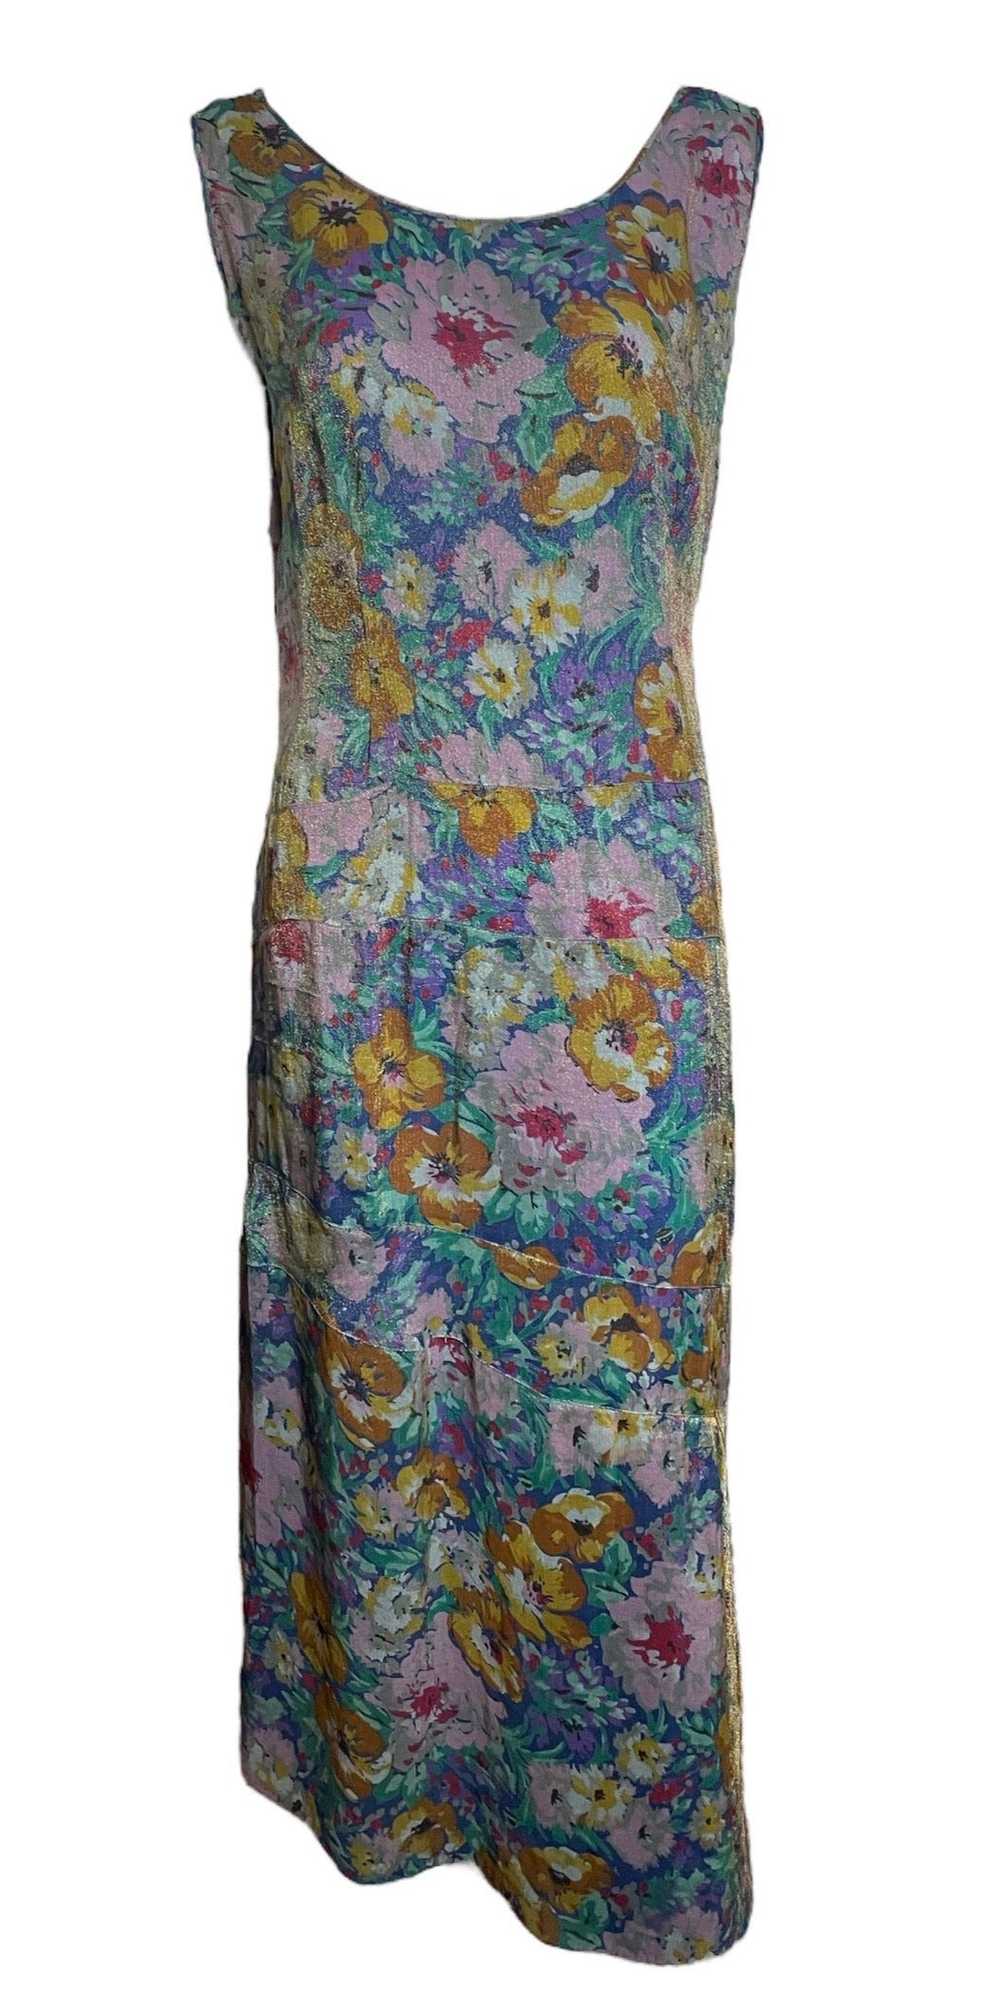 Late 20s/ Early 30s Floral Lame Bias Cut Dress - Gem